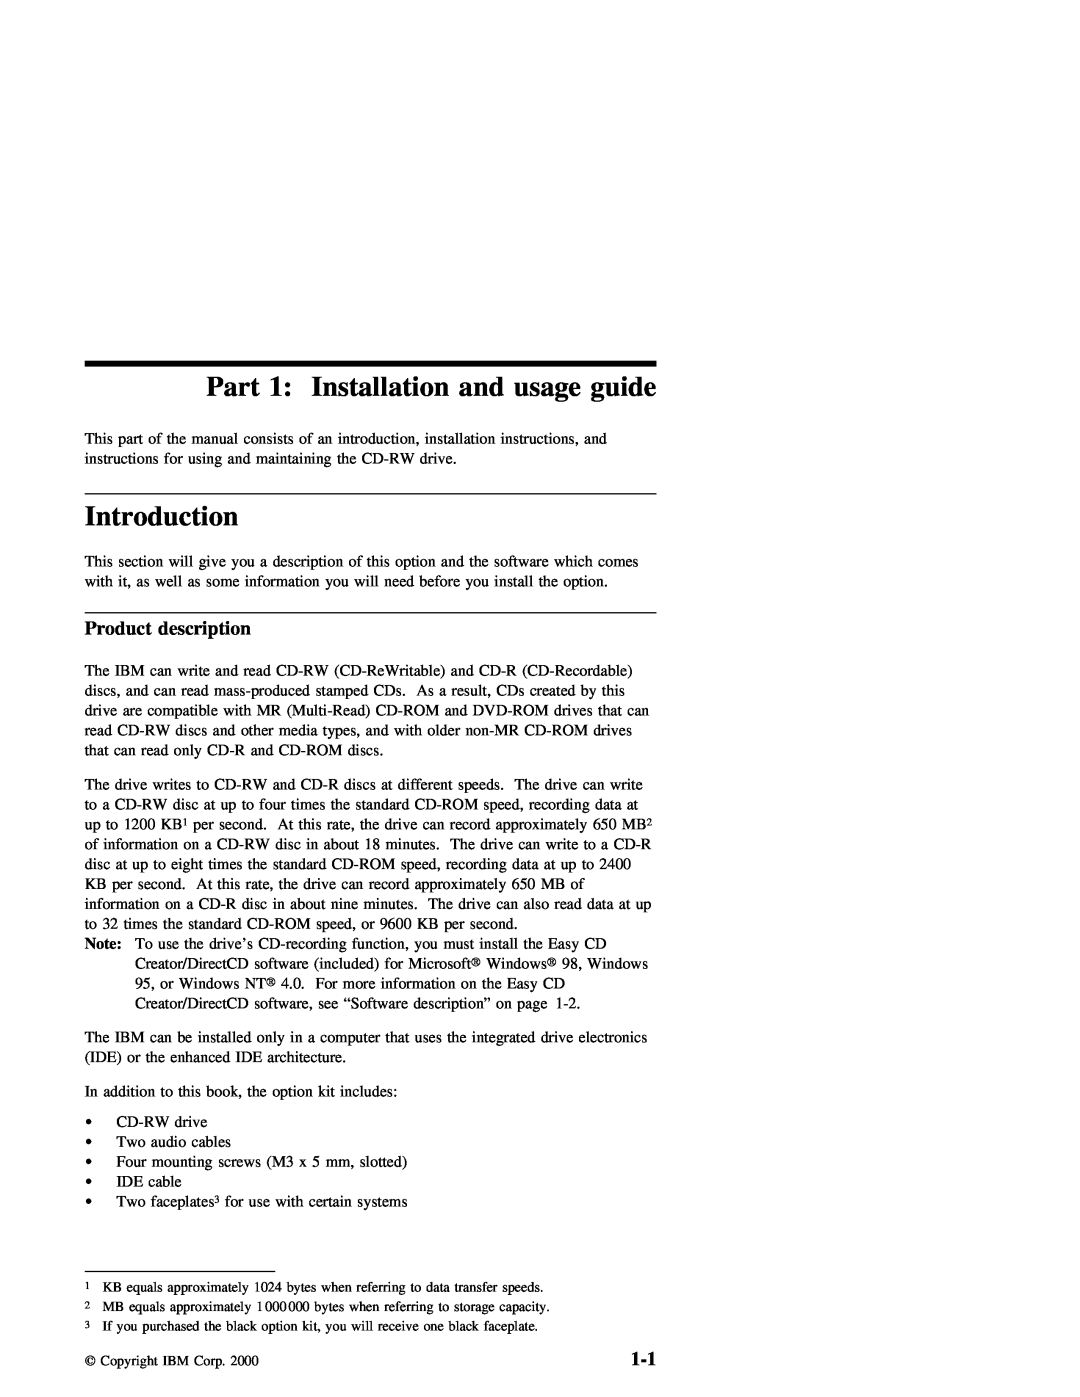 IBM 09N4076 manual Installation, usage, guide, Introduction, Part 